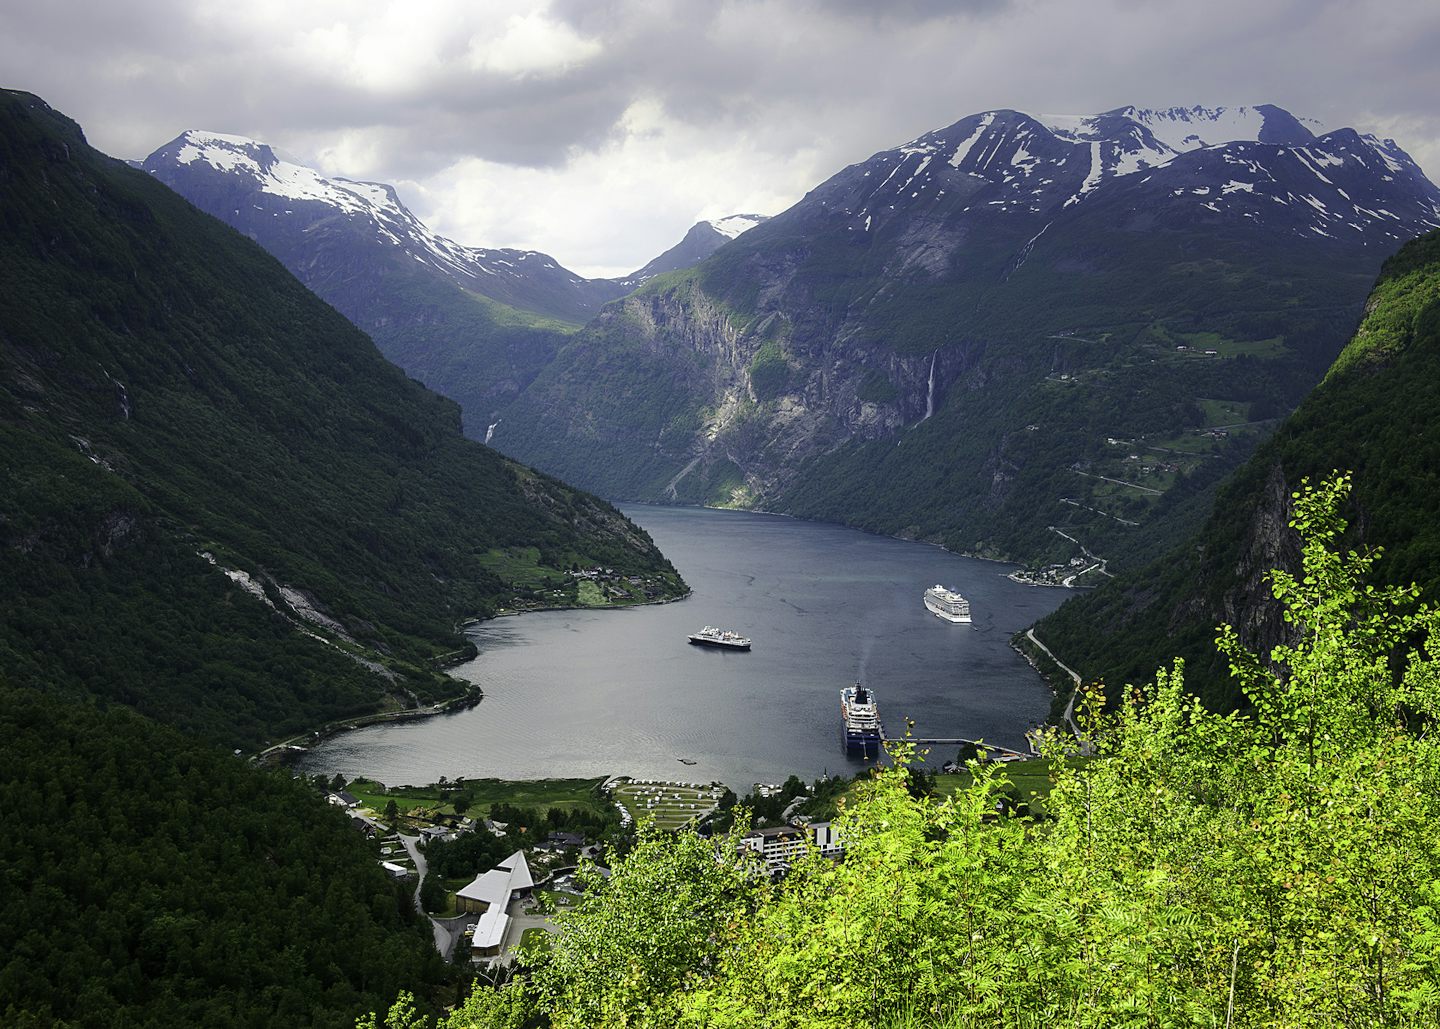 A view of Geirangerfjord from the Queen's Chair.  One of the many viewpoints